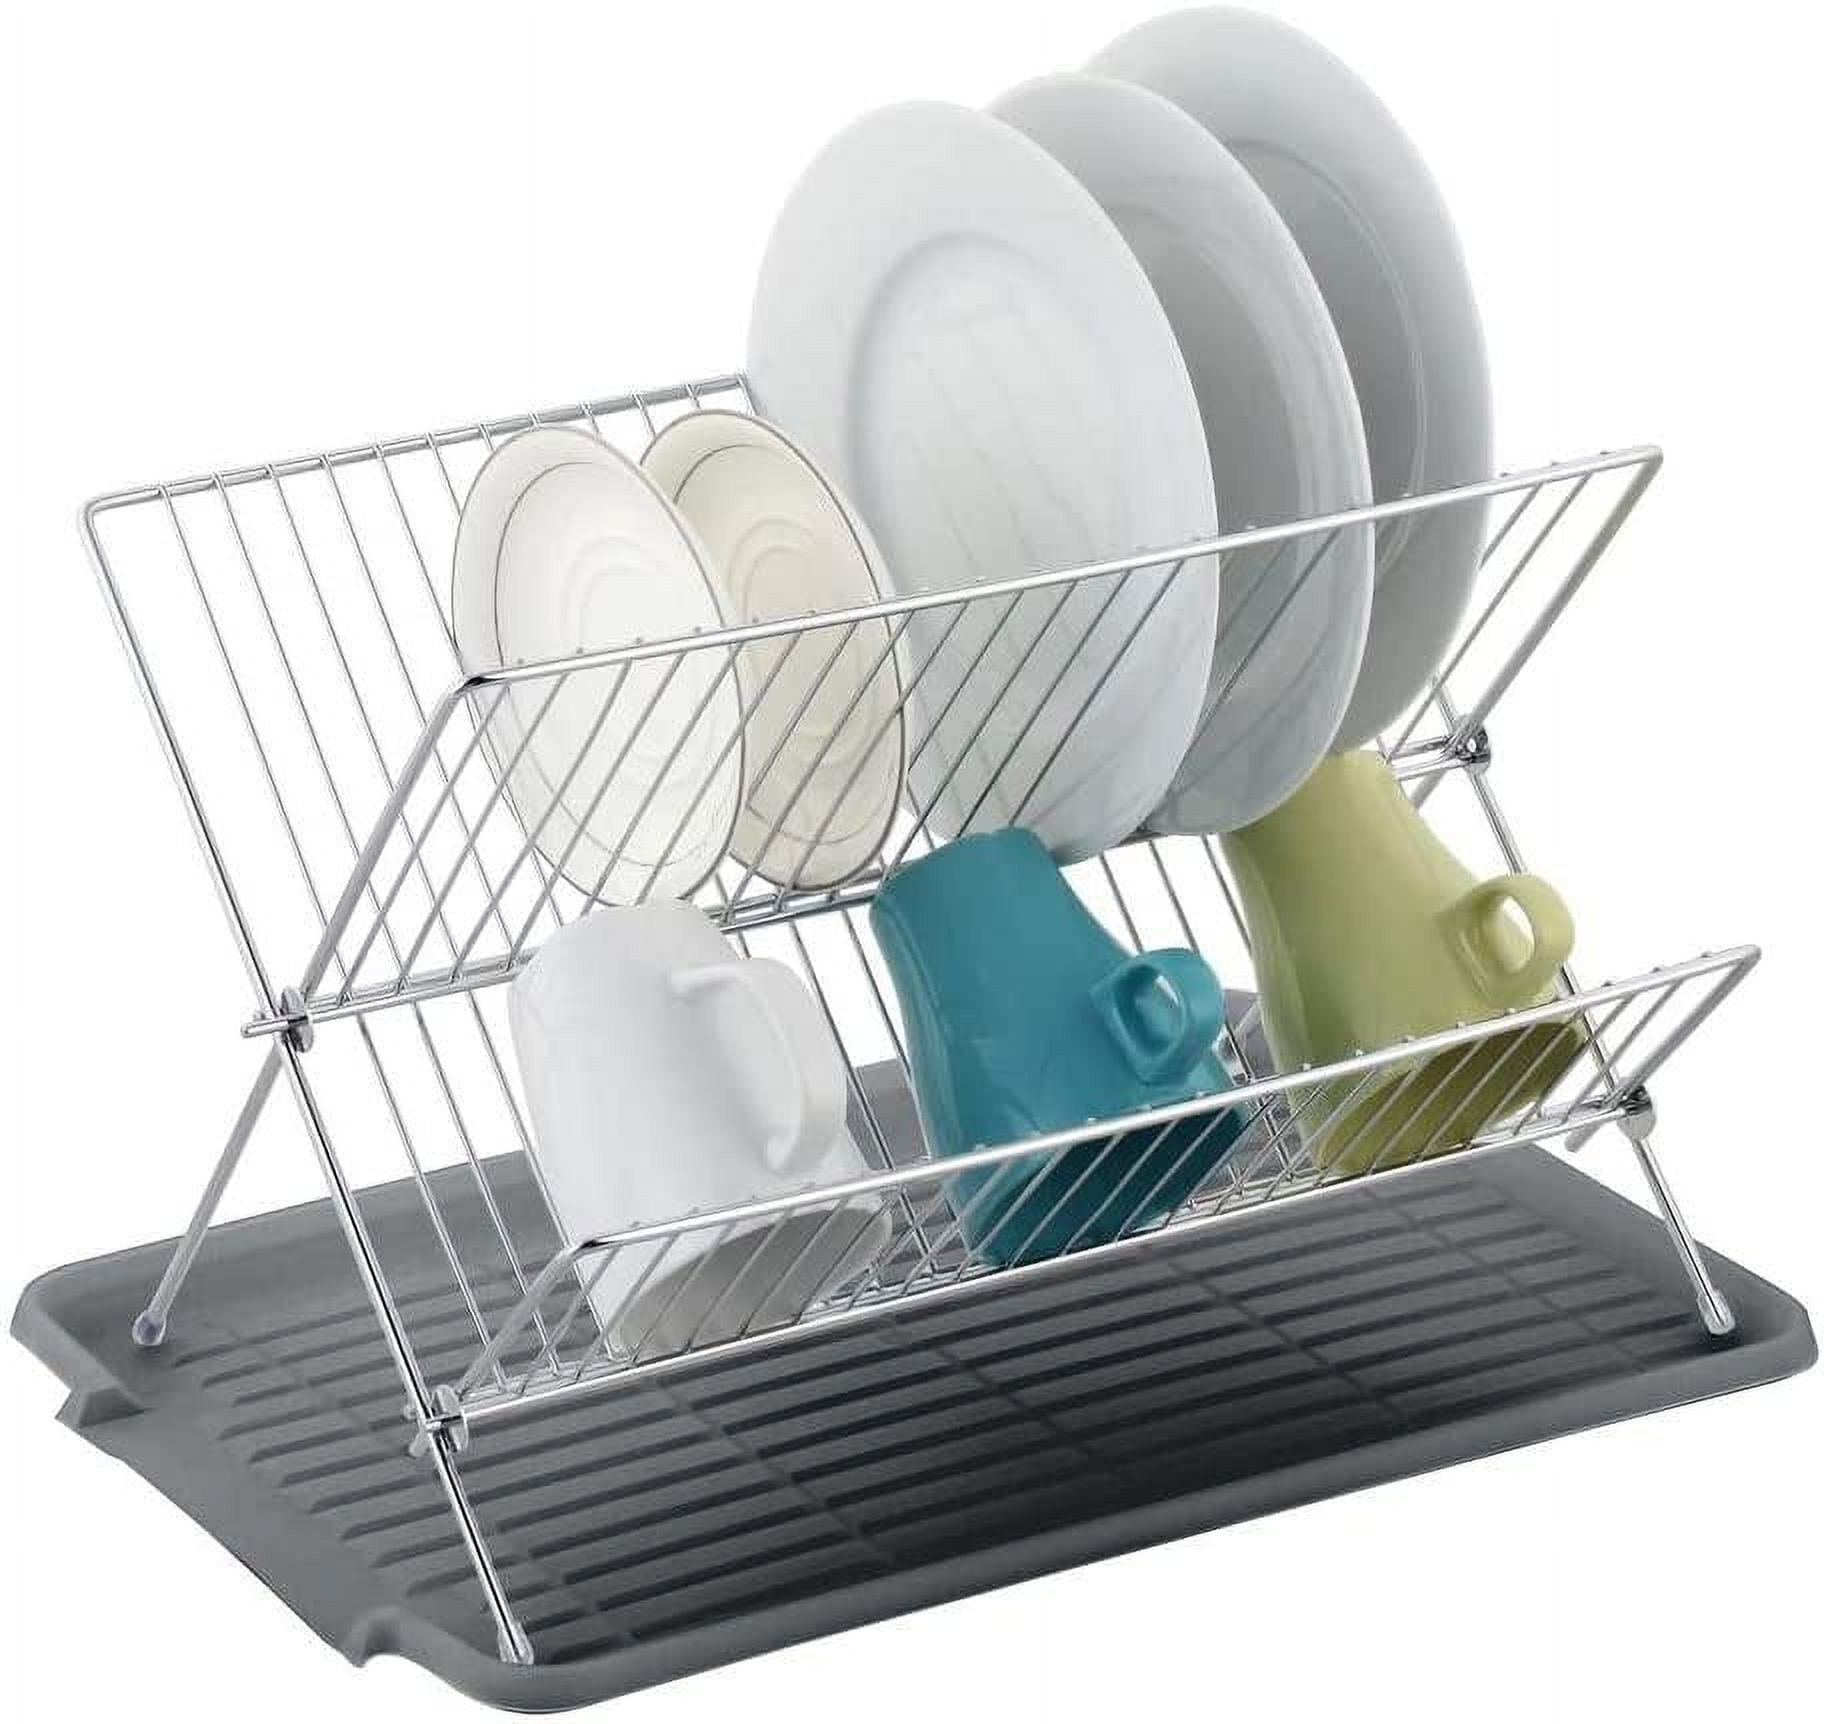 YKLSLH Dish Drying Rack, Collapsible Dish Racks for Kitchen Counter, 2 Tier  Durable Dish Drainer with Utensil Holder-Kitchen Drying Rack